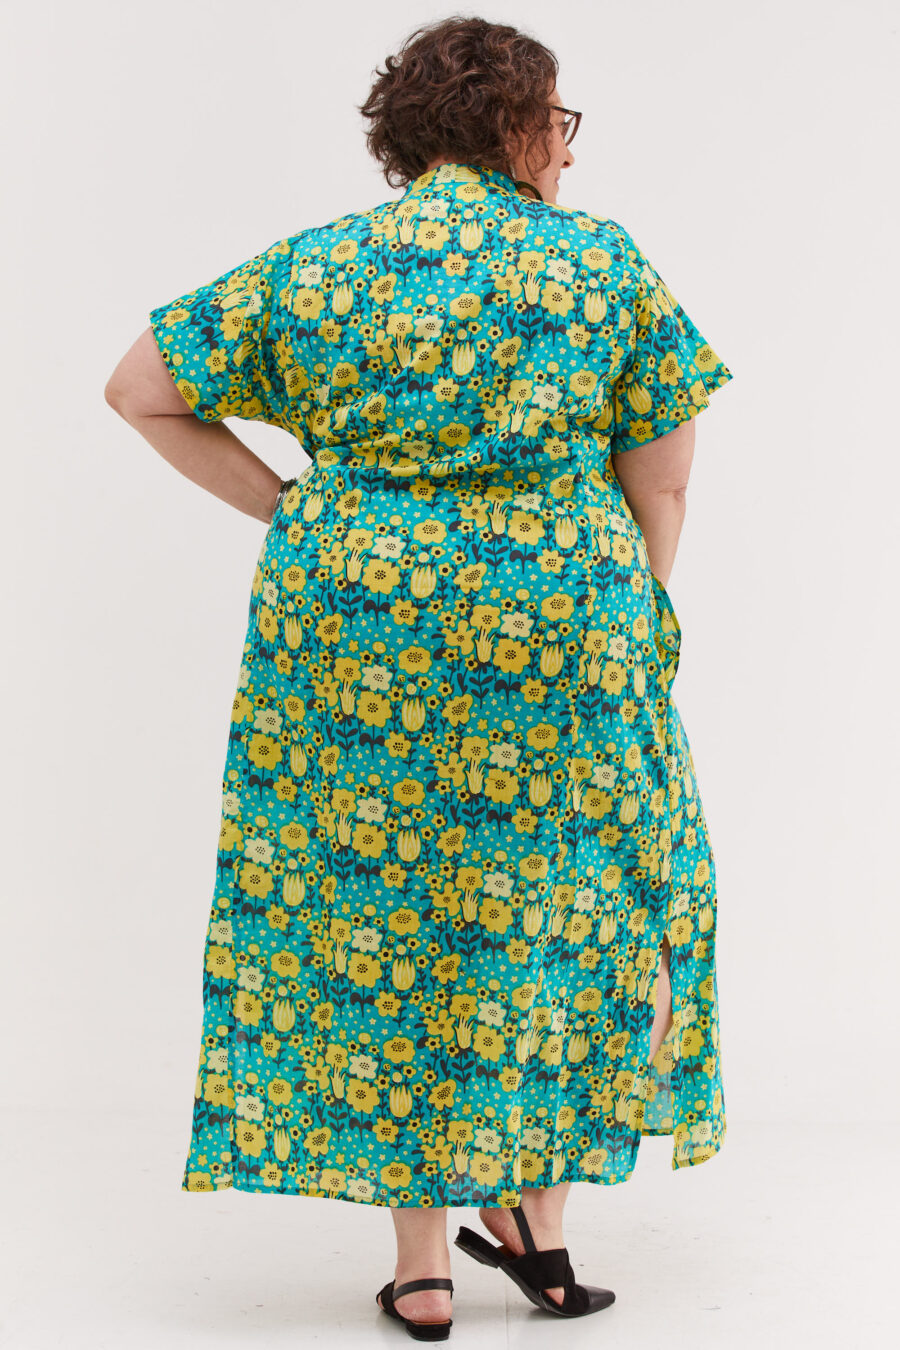 Jalabiya dress | Uniquely designed dress - Optimism print, tourquise dress with yellow flowers print by comfort zone boutique